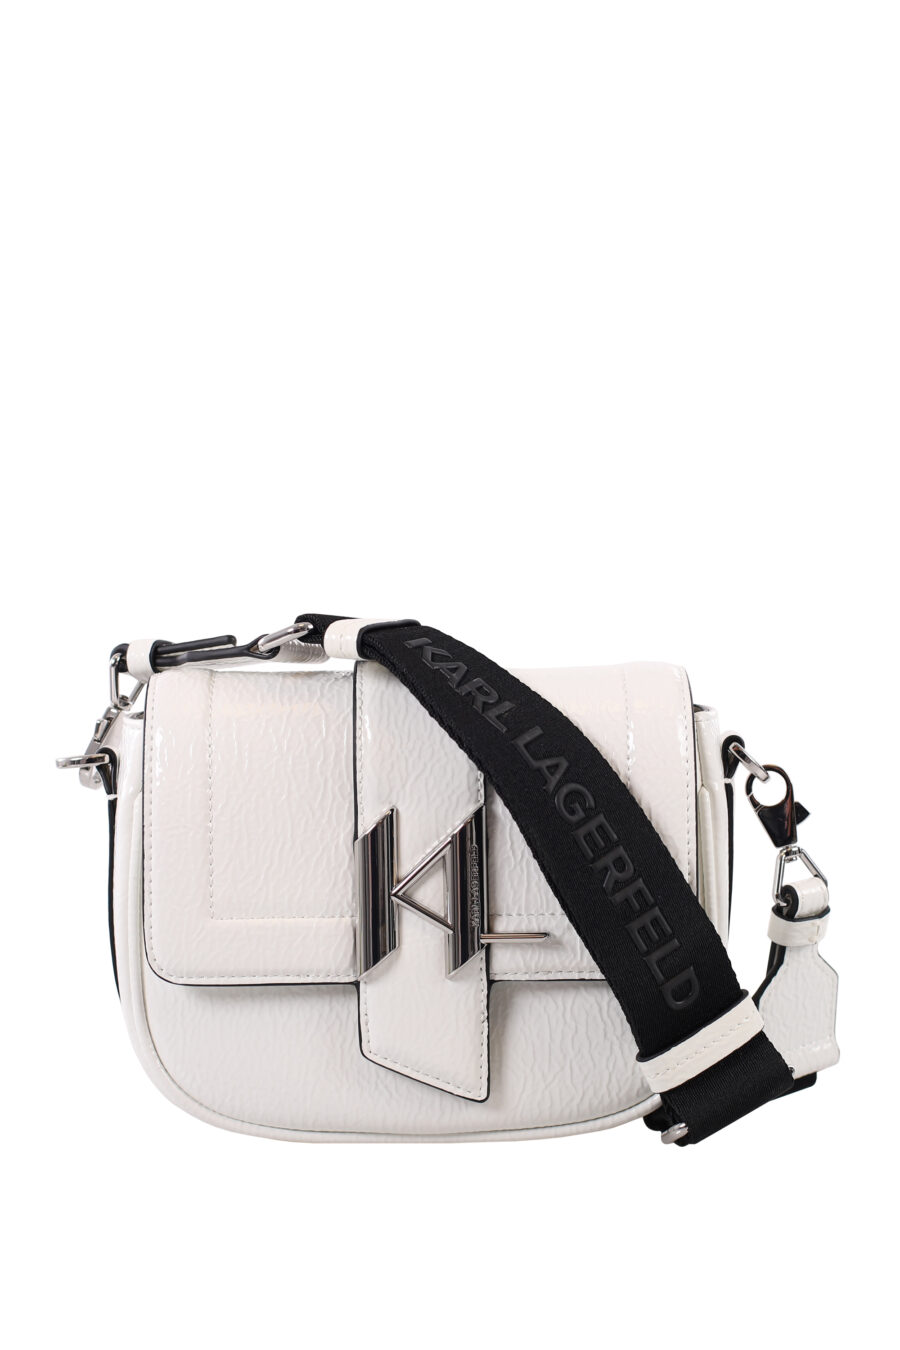 Small white flap shoulder bag with metal logo - IMG 1732